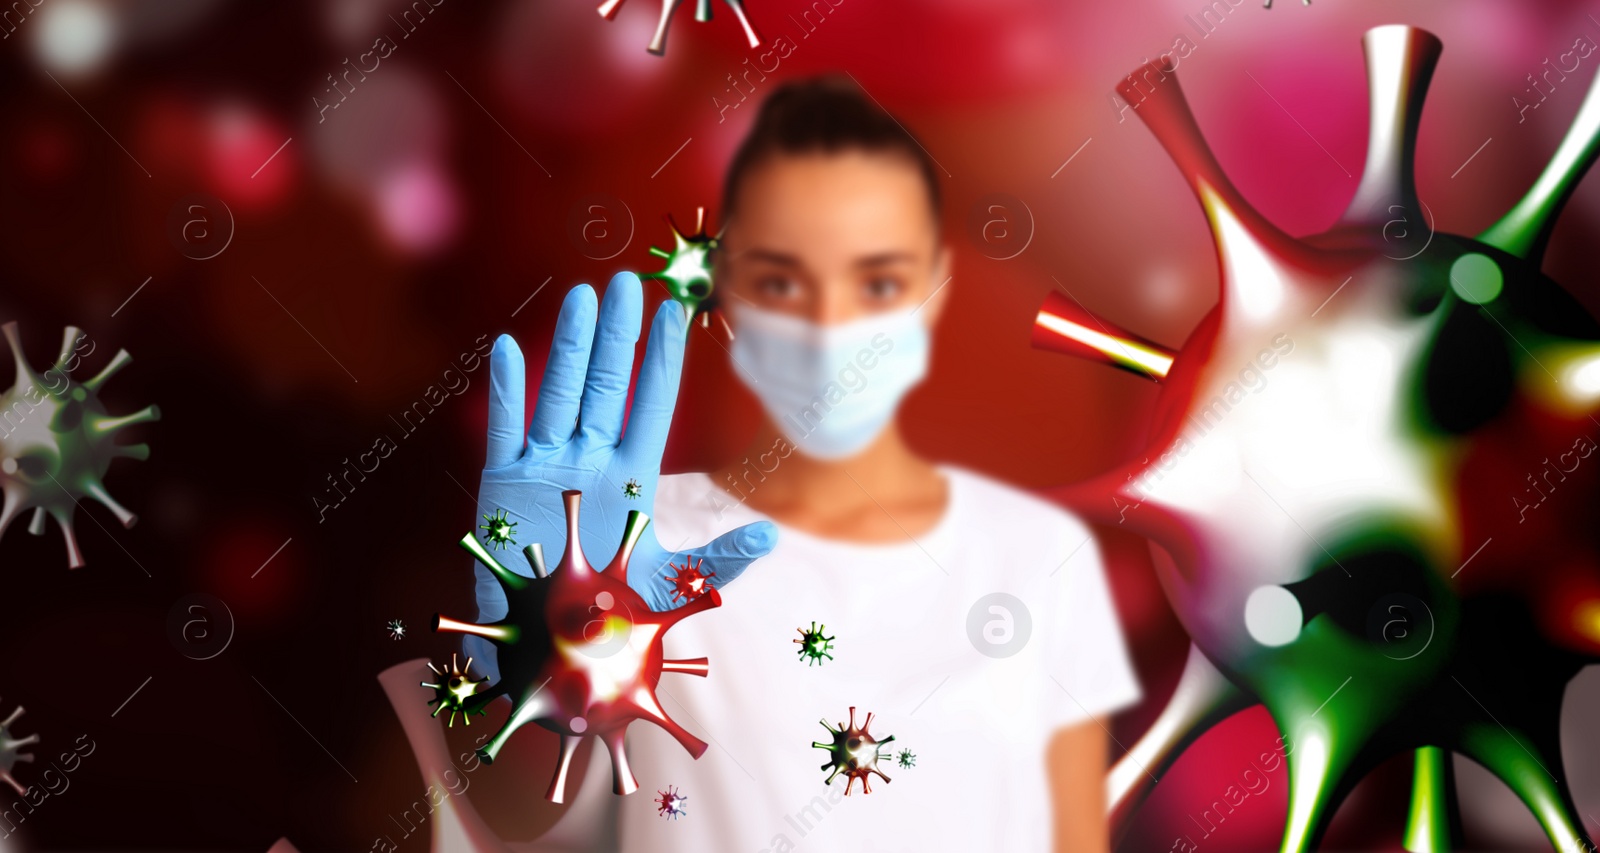 Image of Be healthy - boost your immunity. Doctor in protective mask showing stop gesture to viruses, focus on hand